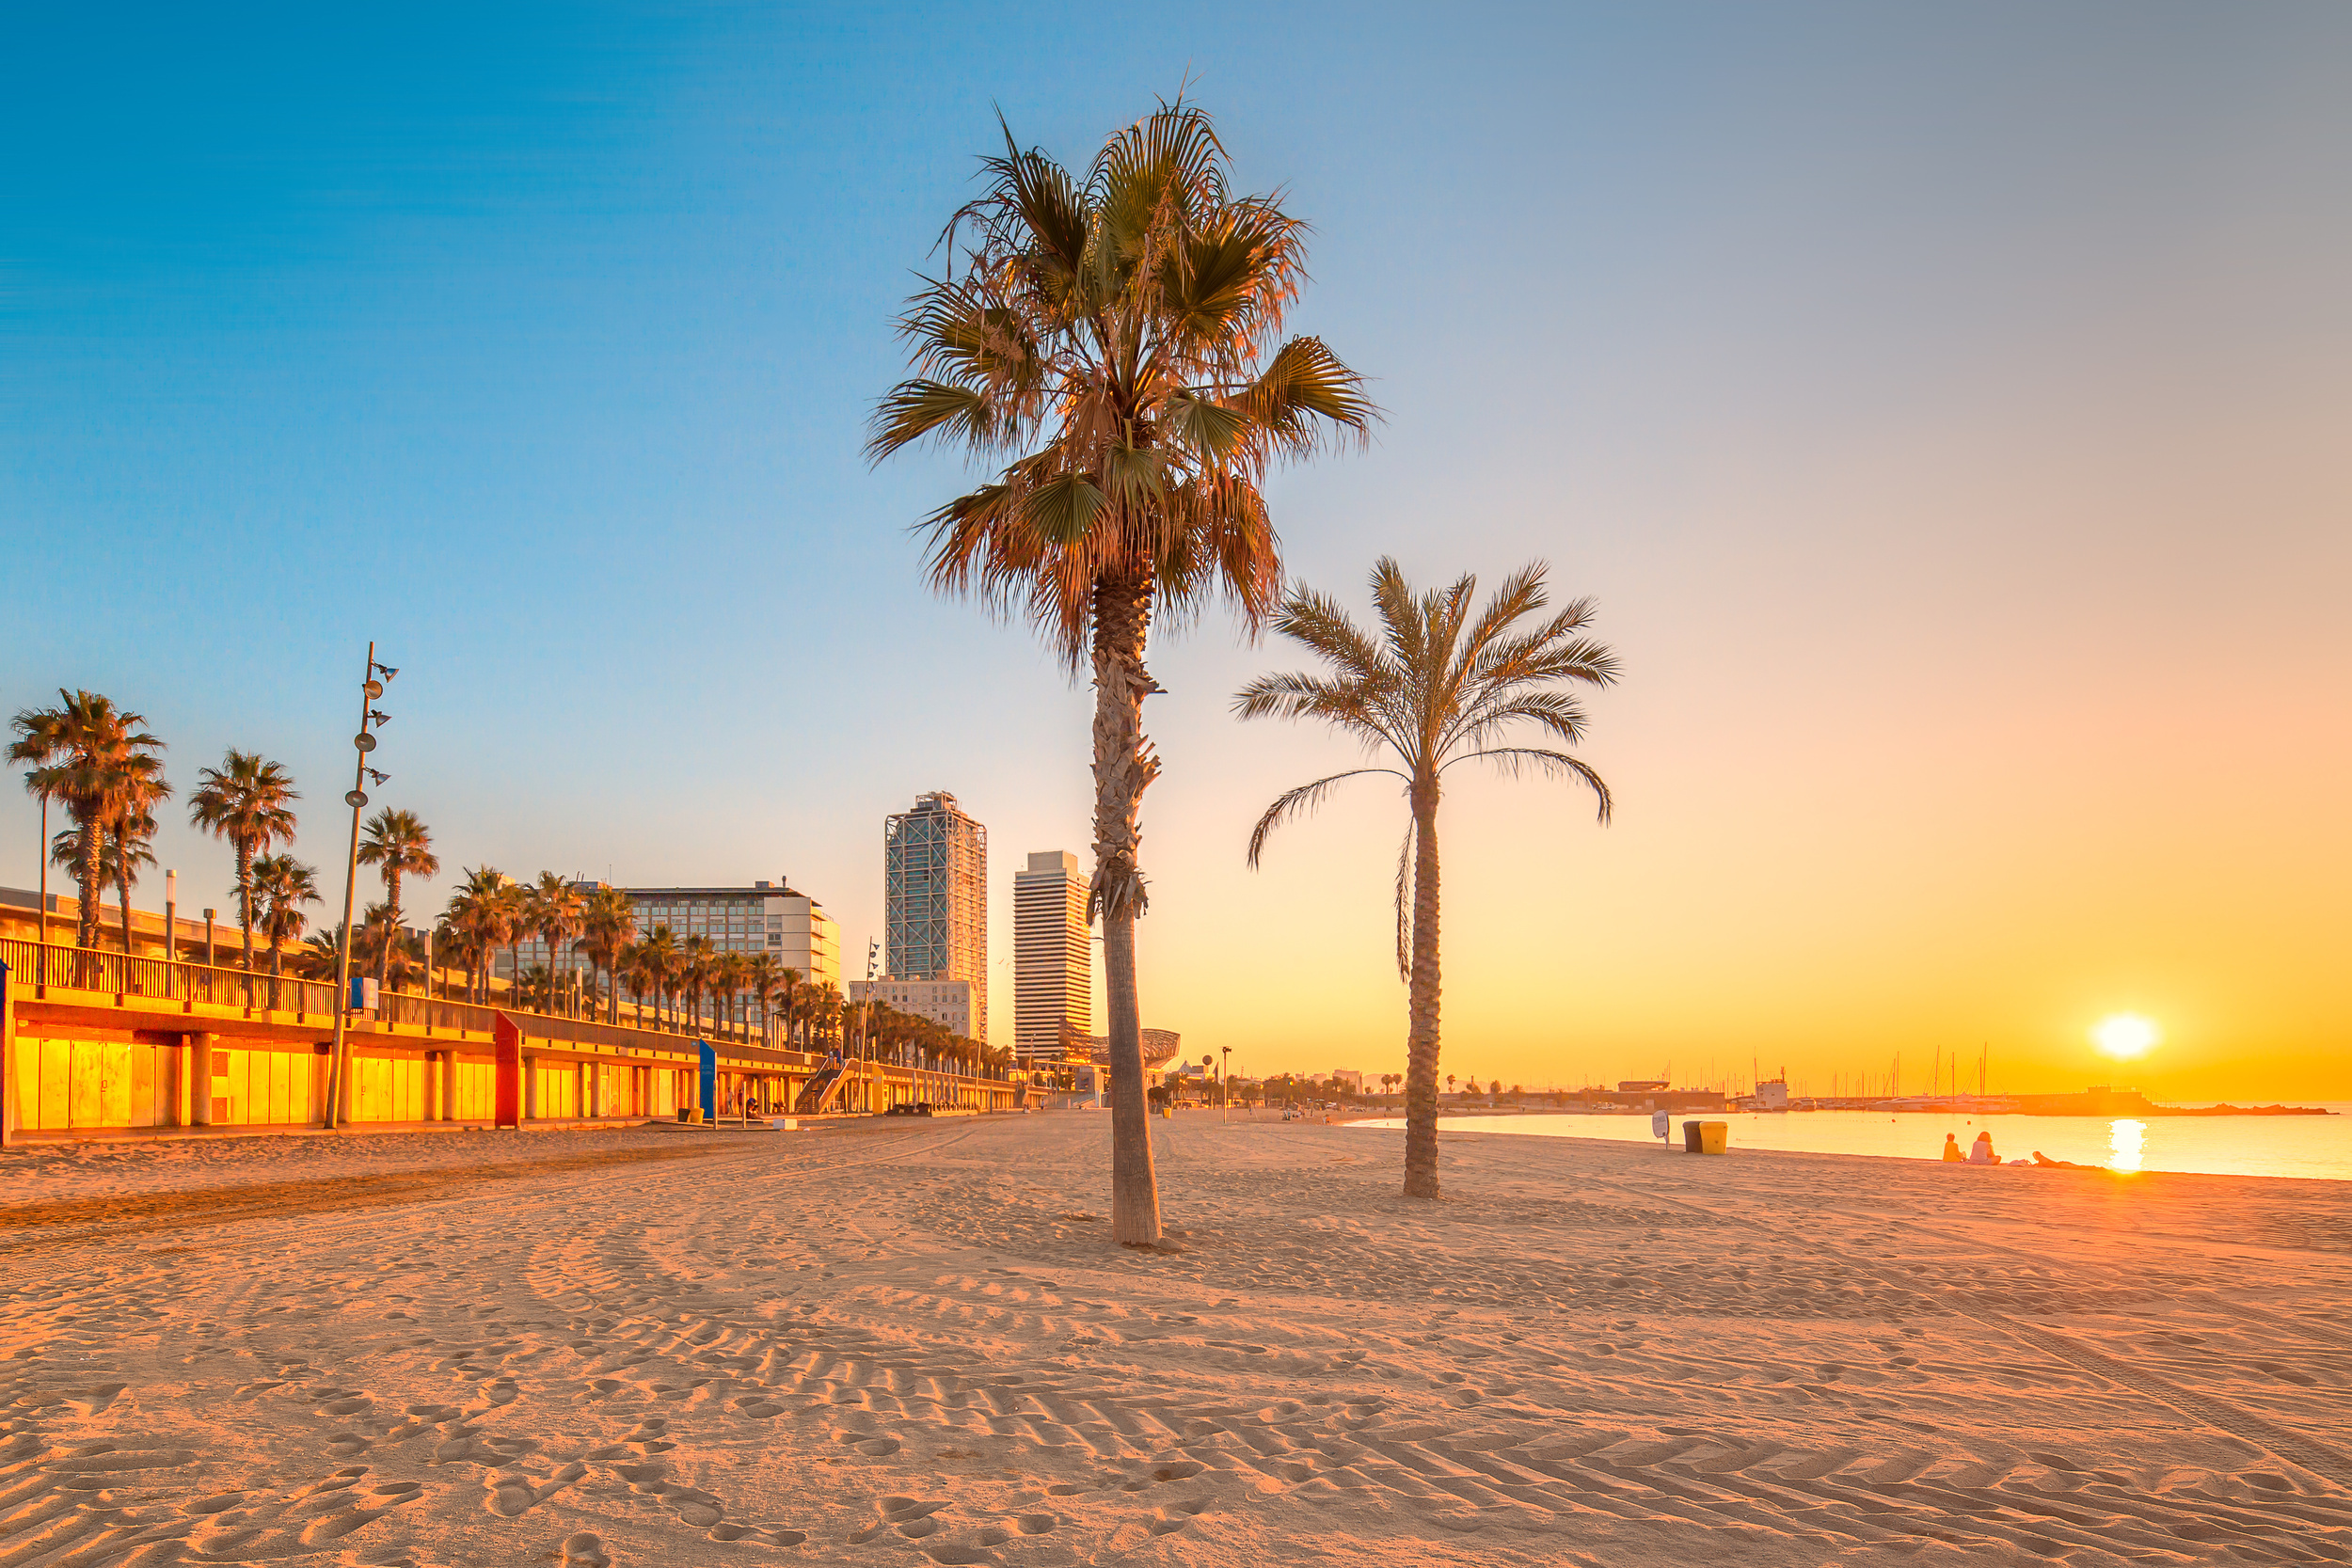 <p>There’s a reason people can’t get enough of Barcelona, to the point that, back in 2015, some residents put a sign on one of the beaches telling tourists to go home. Now, the tensions have cooled a bit, and you can enjoy this cosmopolitan city and its numerous beaches without fear of being told to leave!</p><p>You may also like: <a href='https://www.yardbarker.com/lifestyle/articles/25_cooking_hacks_you_wont_believe_you_didnt_already_know_012224/s1__34563020'>25 cooking hacks you won’t believe you didn’t already know</a></p>